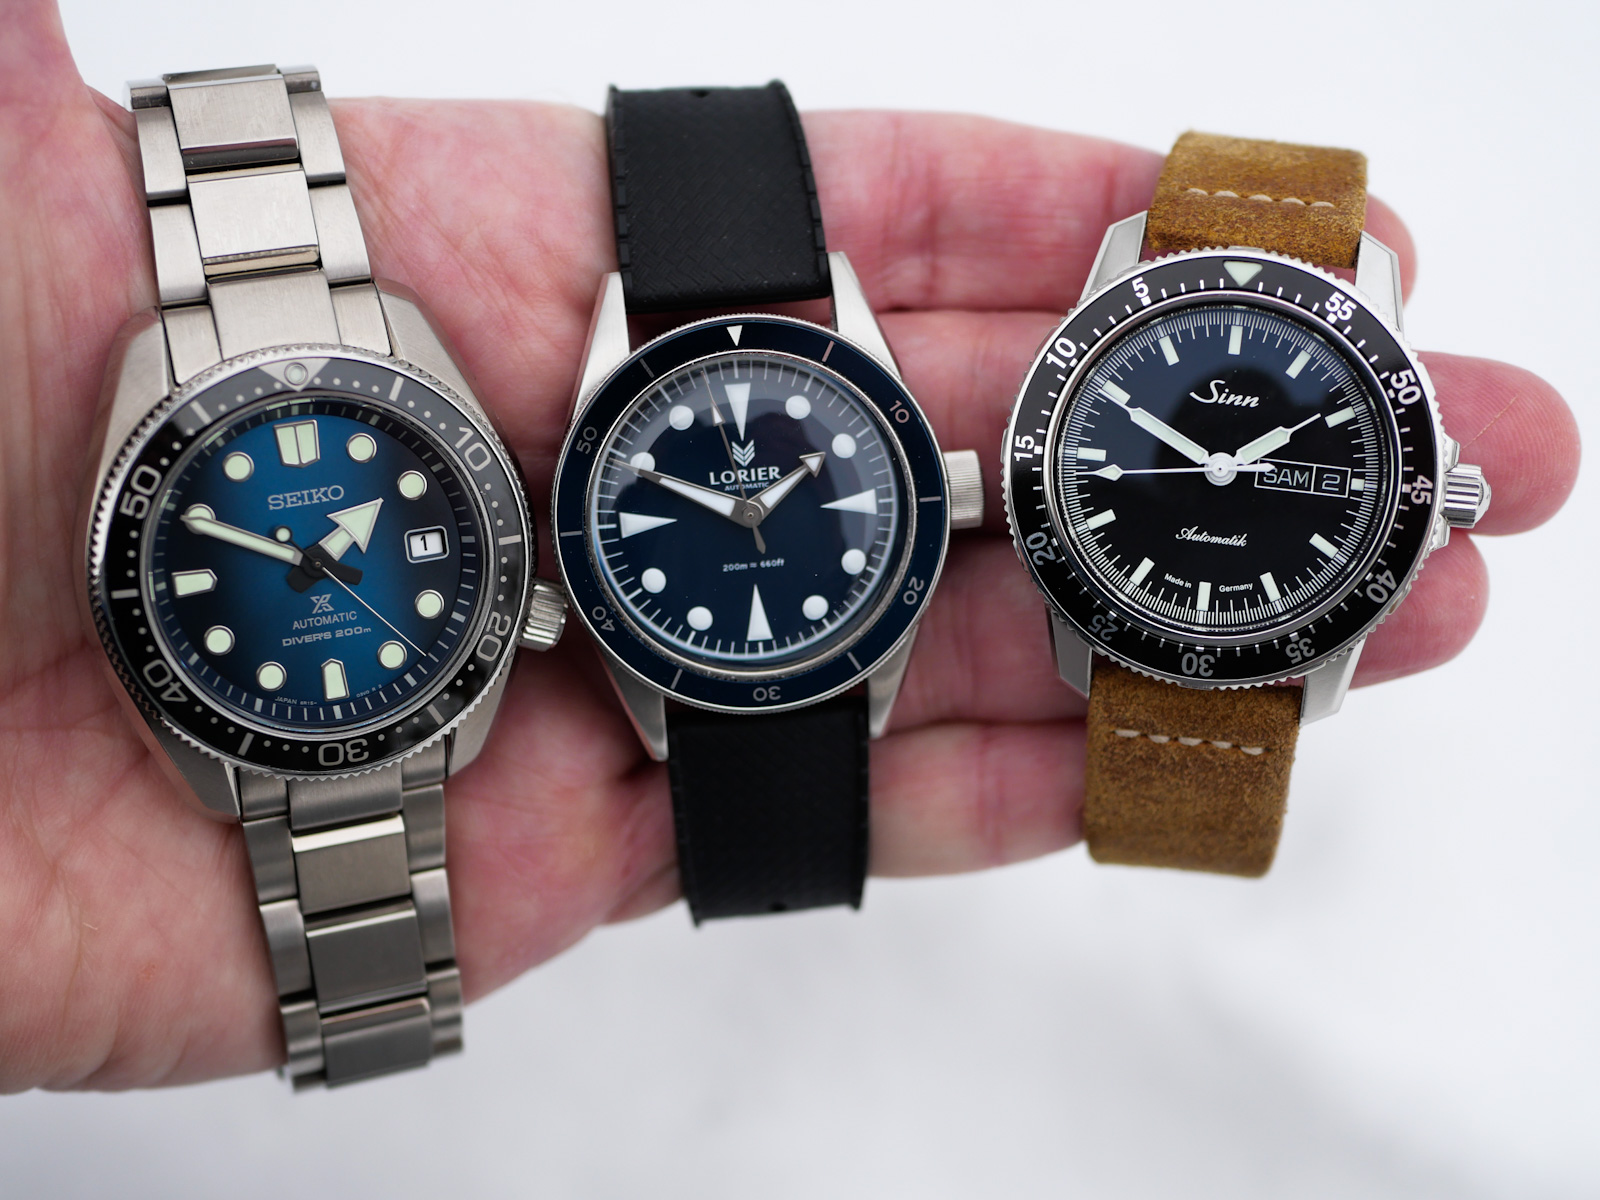 [Recommendation] Lorier Neptune or Baltic Aquascaphe : r/Watches